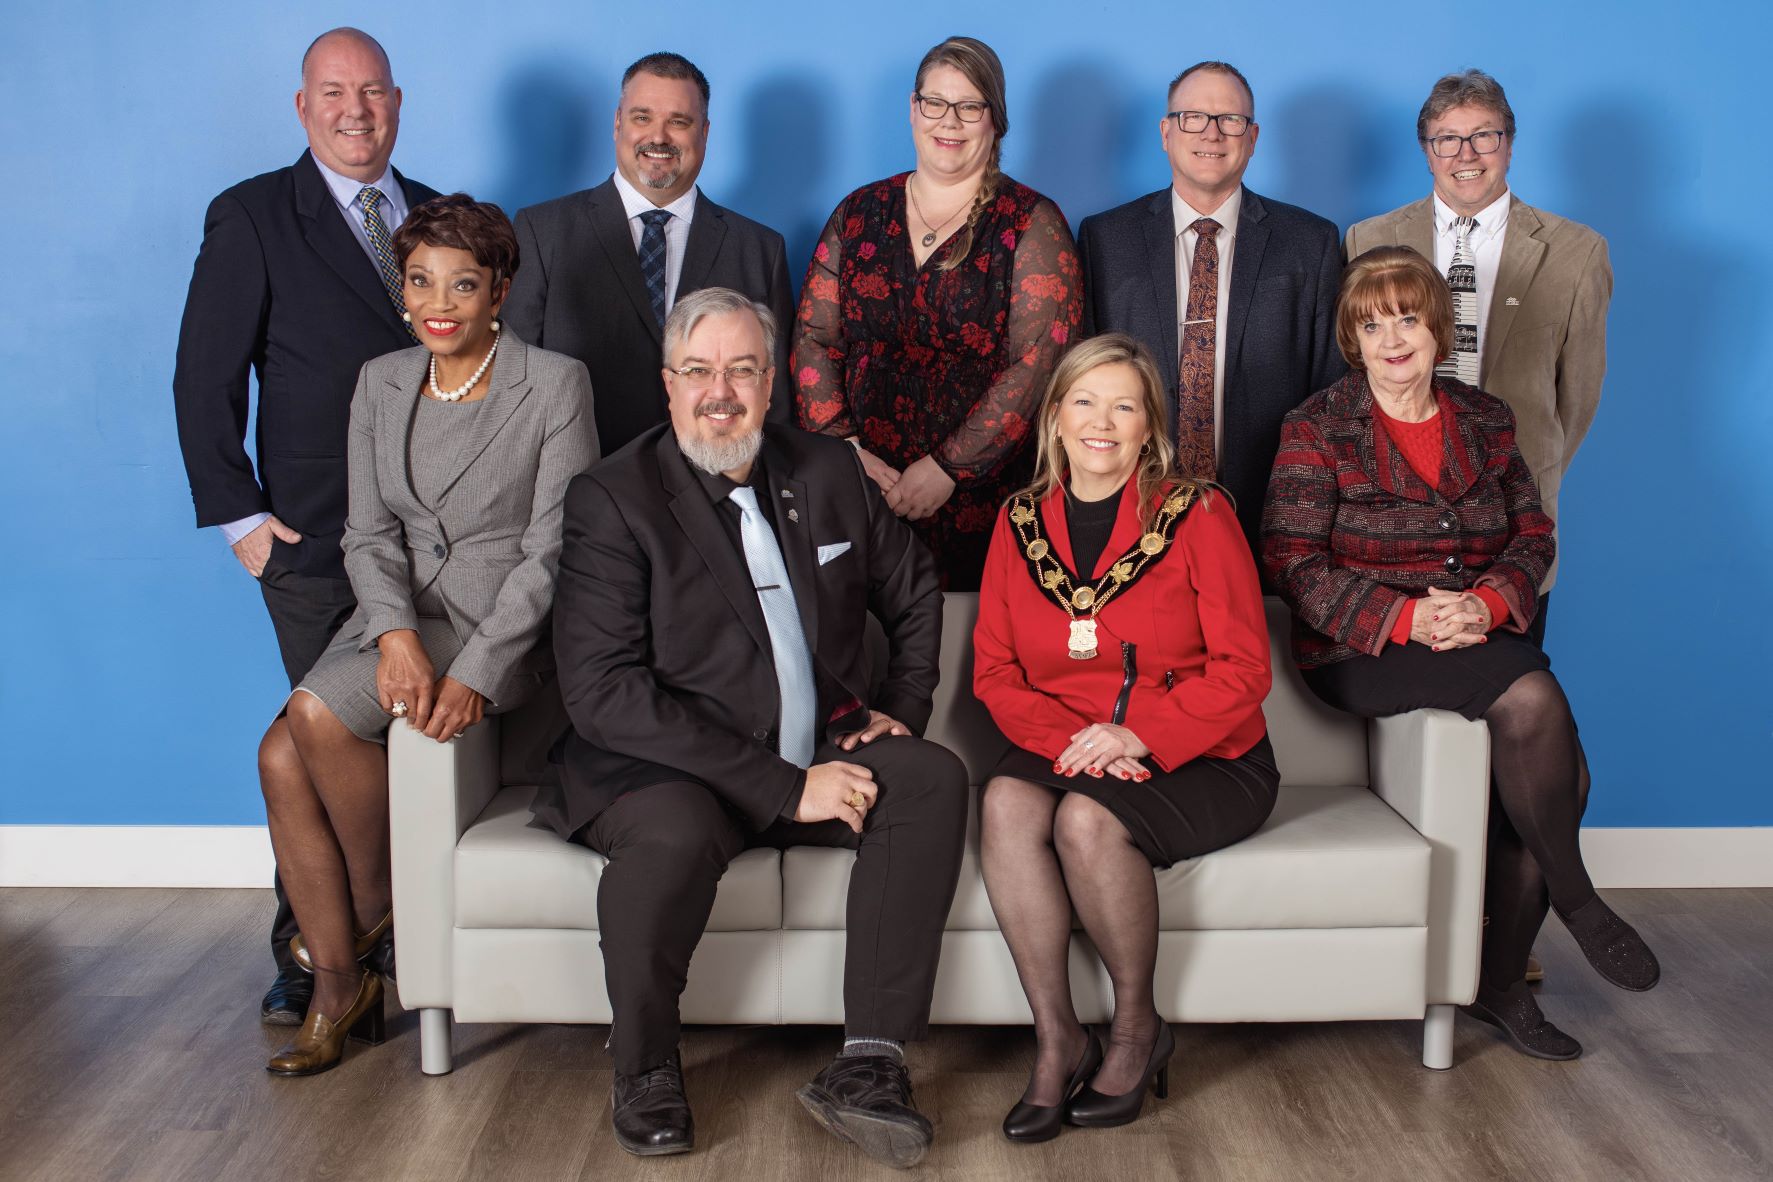 Group photo of council members